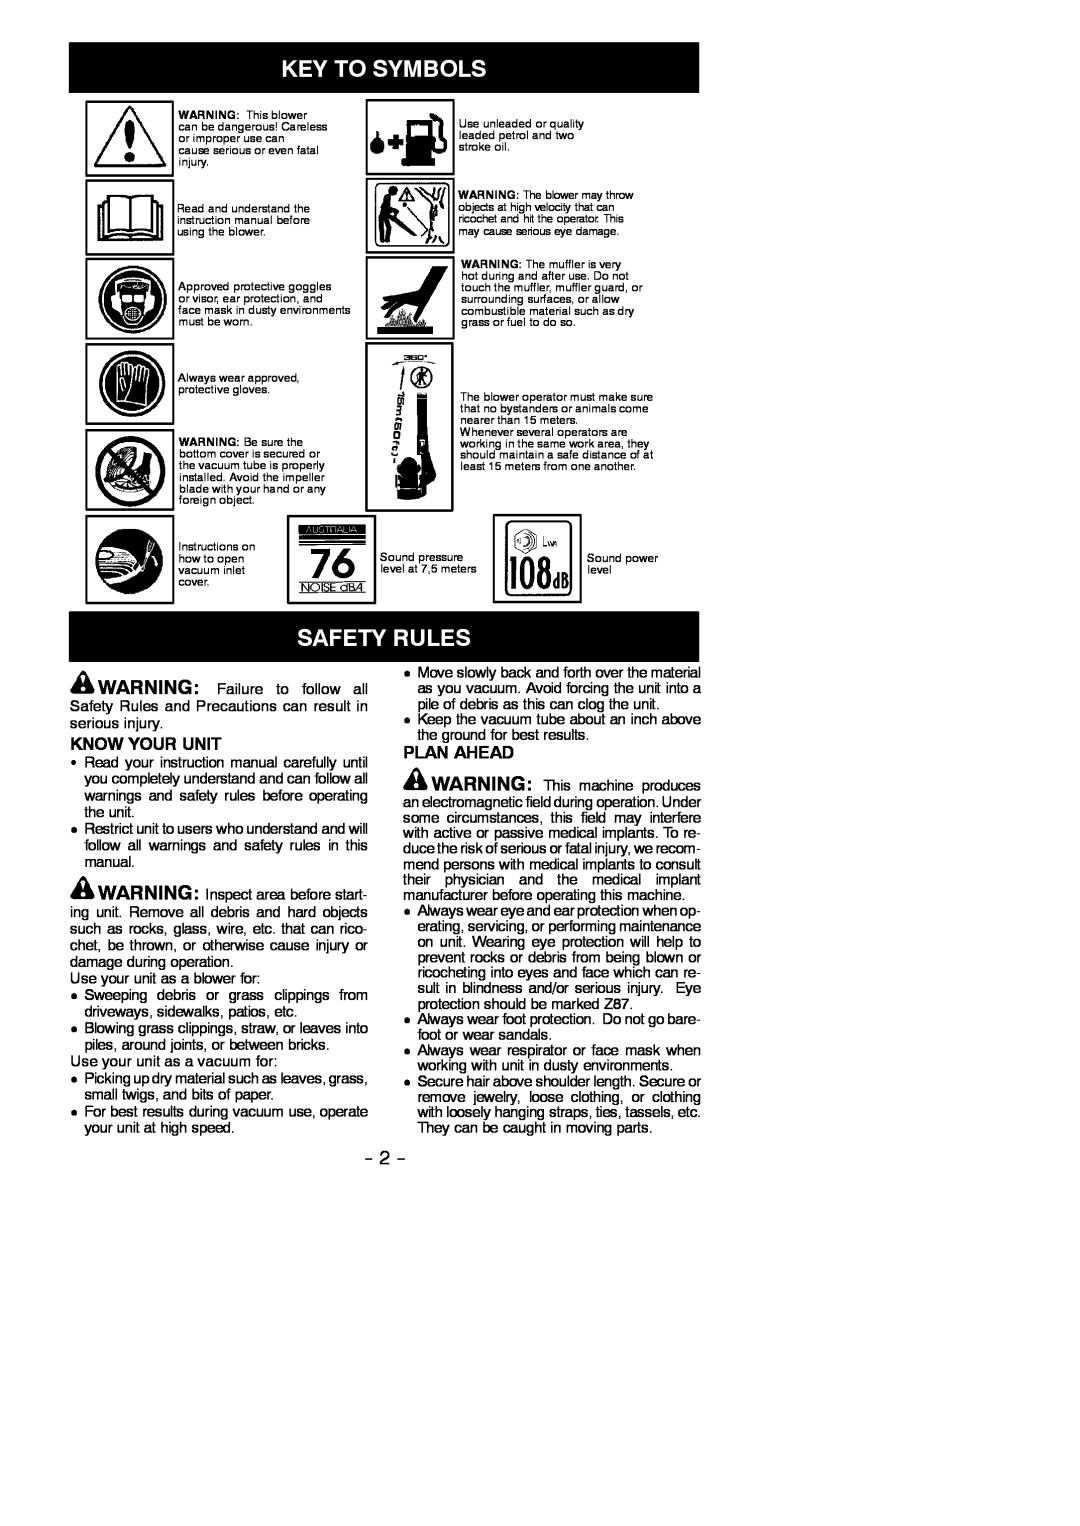 McCulloch MAC GBV 325 instruction manual Key To Symbols, Safety Rules, Know Your Unit, Plan Ahead 